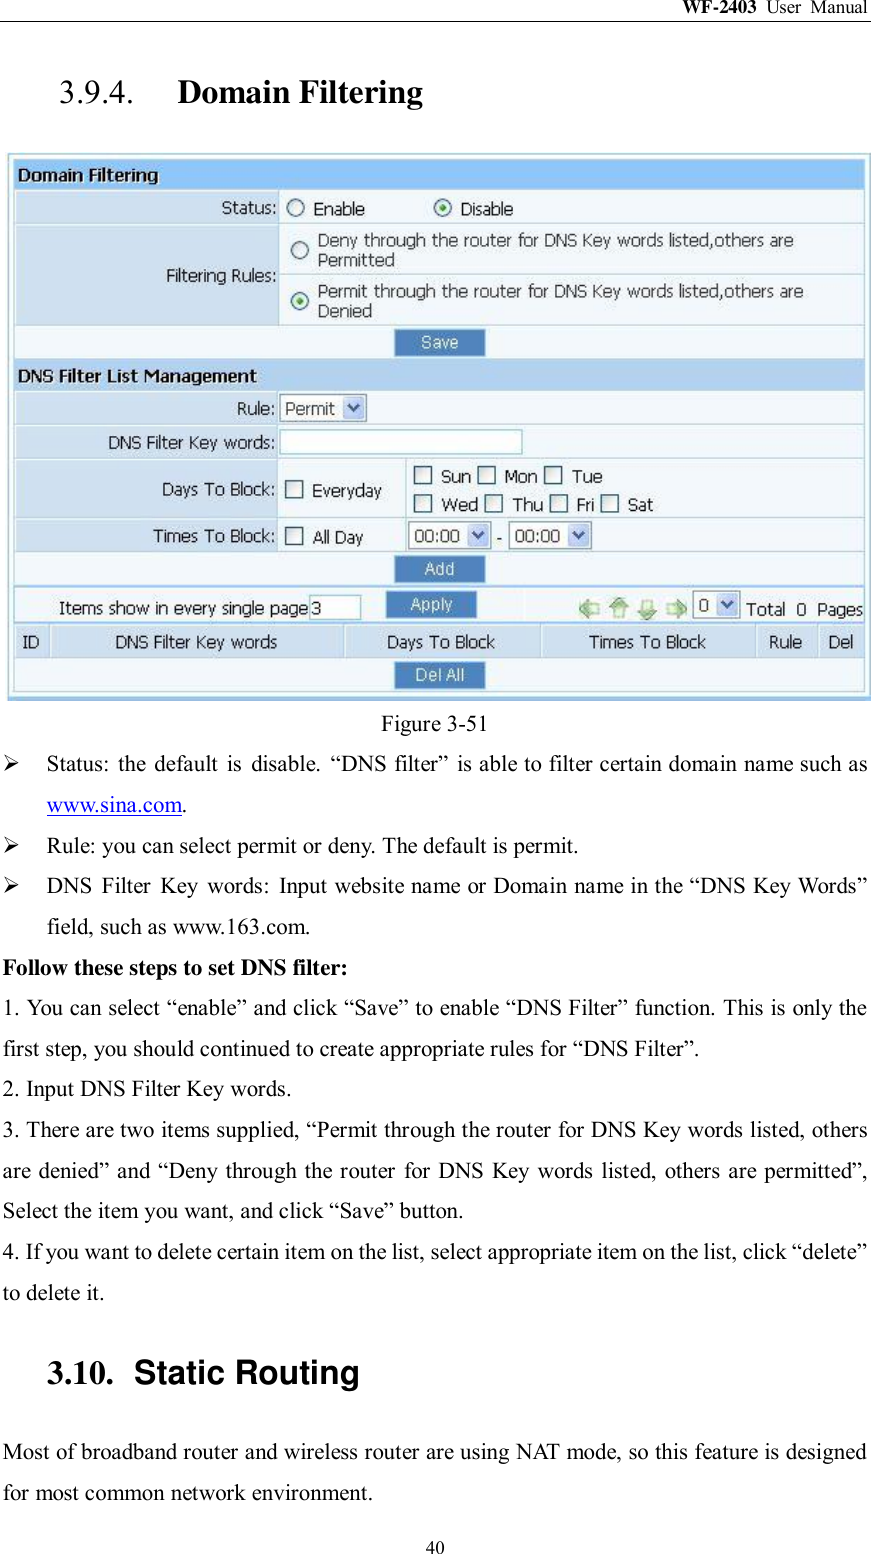 WF-2403  User  Manual  40 3.9.4. Domain Filtering  Figure 3-51  Status:  the  default  is  disable.  “DNS filter”  is able to filter certain domain name such as www.sina.com.  Rule: you can select permit or deny. The default is permit.  DNS  Filter  Key  words:  Input website name or Domain name in the “DNS Key Words” field, such as www.163.com. Follow these steps to set DNS filter:   1. You can select “enable” and click “Save” to enable “DNS Filter” function. This is only the first step, you should continued to create appropriate rules for “DNS Filter”.   2. Input DNS Filter Key words. 3. There are two items supplied, “Permit through the router for DNS Key words listed, others are denied” and “Deny through the router for DNS Key words listed,  others are permitted”, Select the item you want, and click “Save” button. 4. If you want to delete certain item on the list, select appropriate item on the list, click “delete” to delete it. 3.10.  Static Routing Most of broadband router and wireless router are using NAT mode, so this feature is designed for most common network environment. 